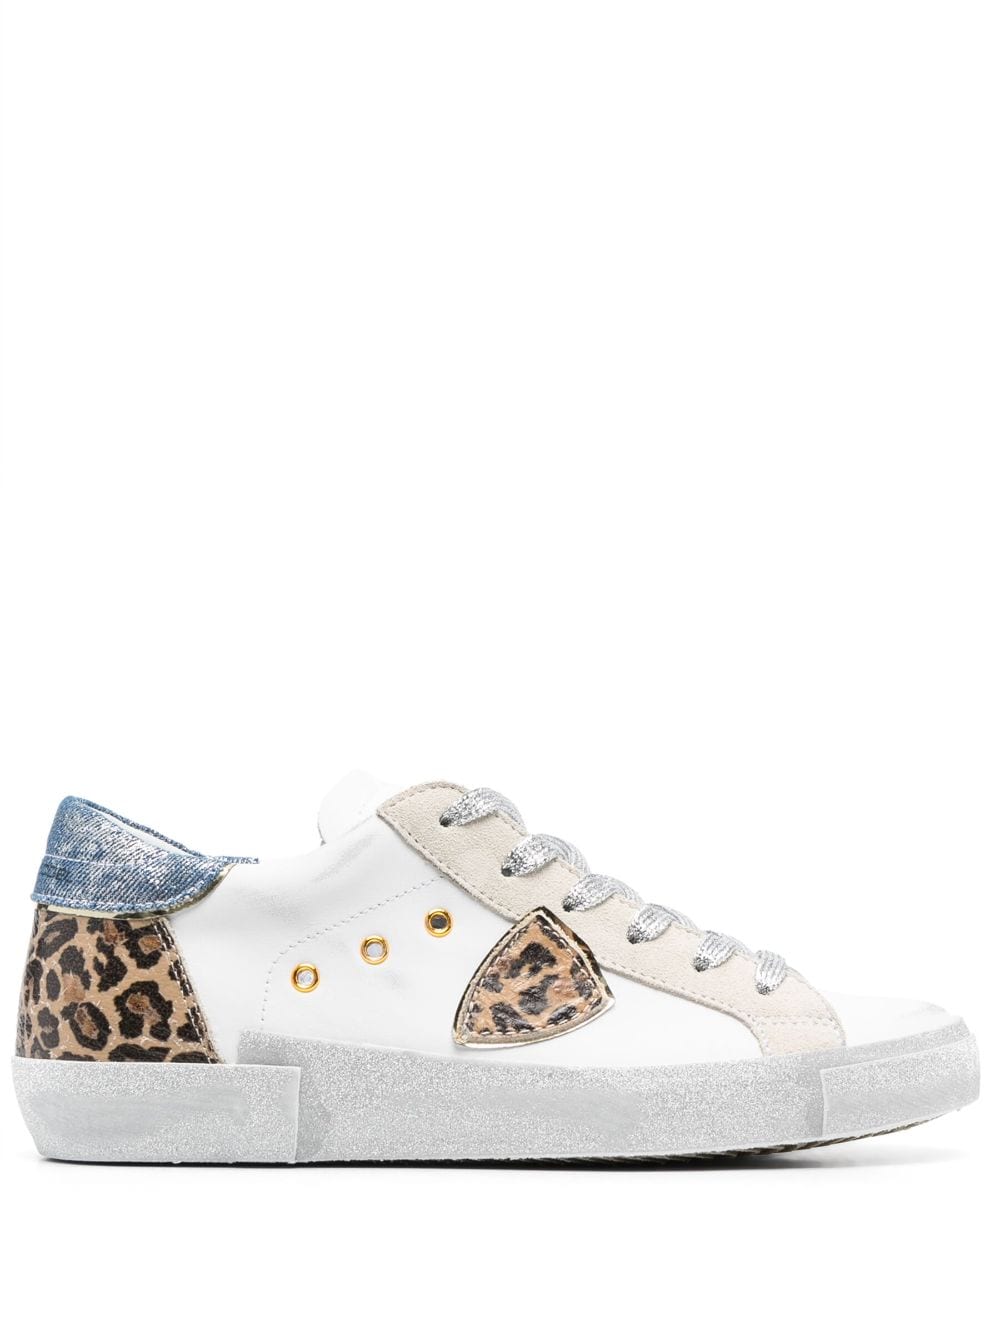 Philippe Model Paris Leopard-print Panelled Leather Sneakers In White